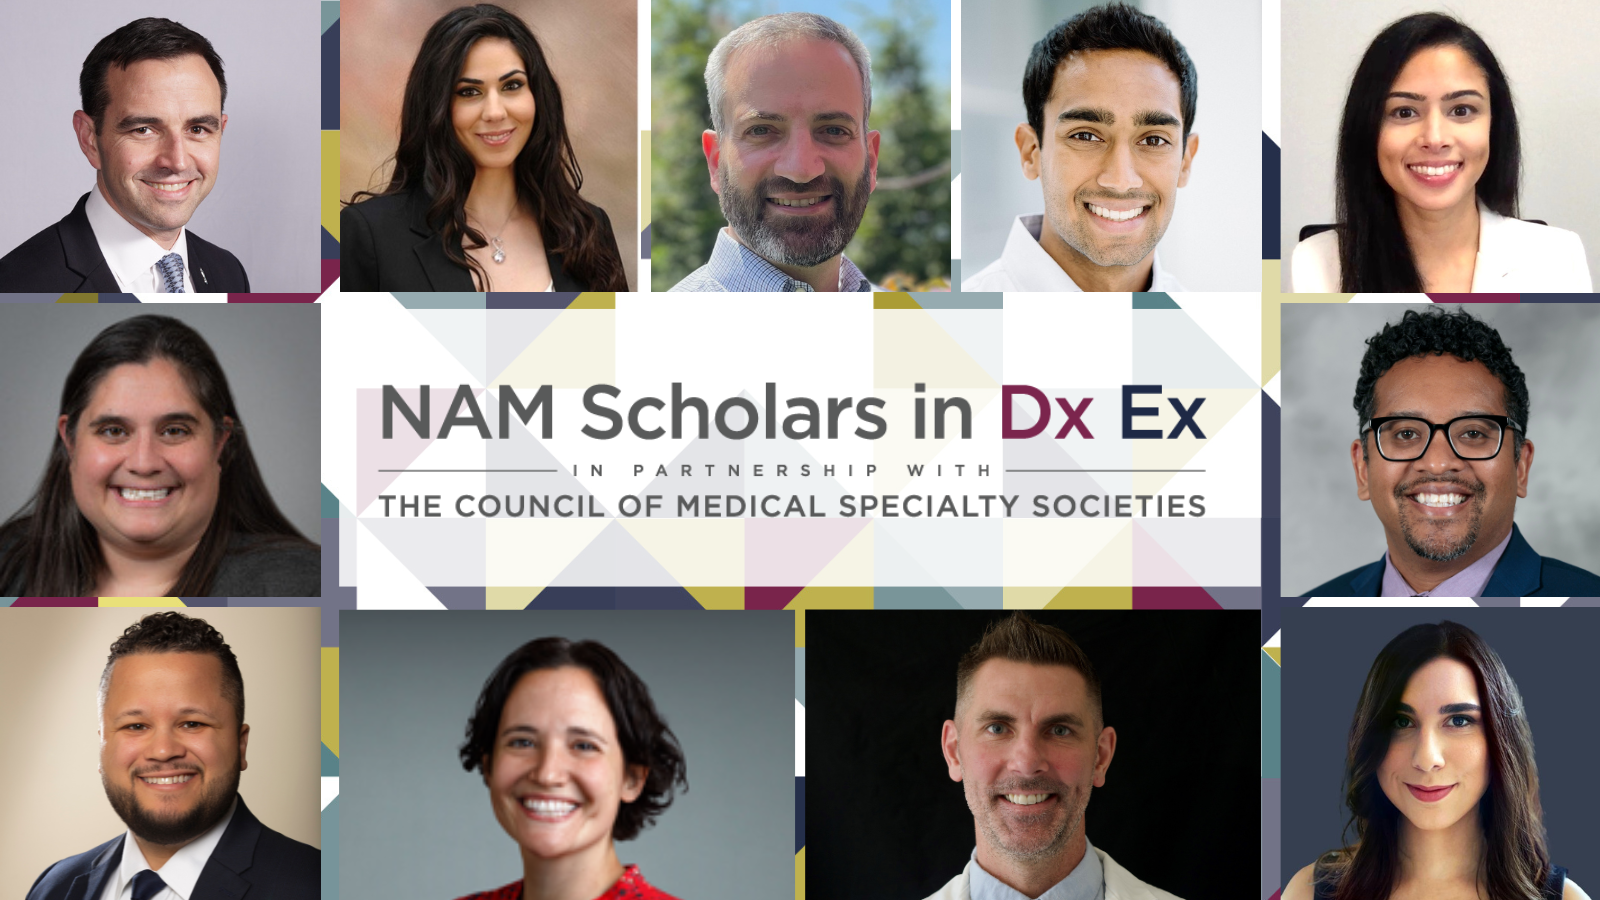 Image states, "NAM Scholars in Dx Ex in partnership with the Council of Medical Specialty Societies," surrounded by the headshots of the eleven scholars.